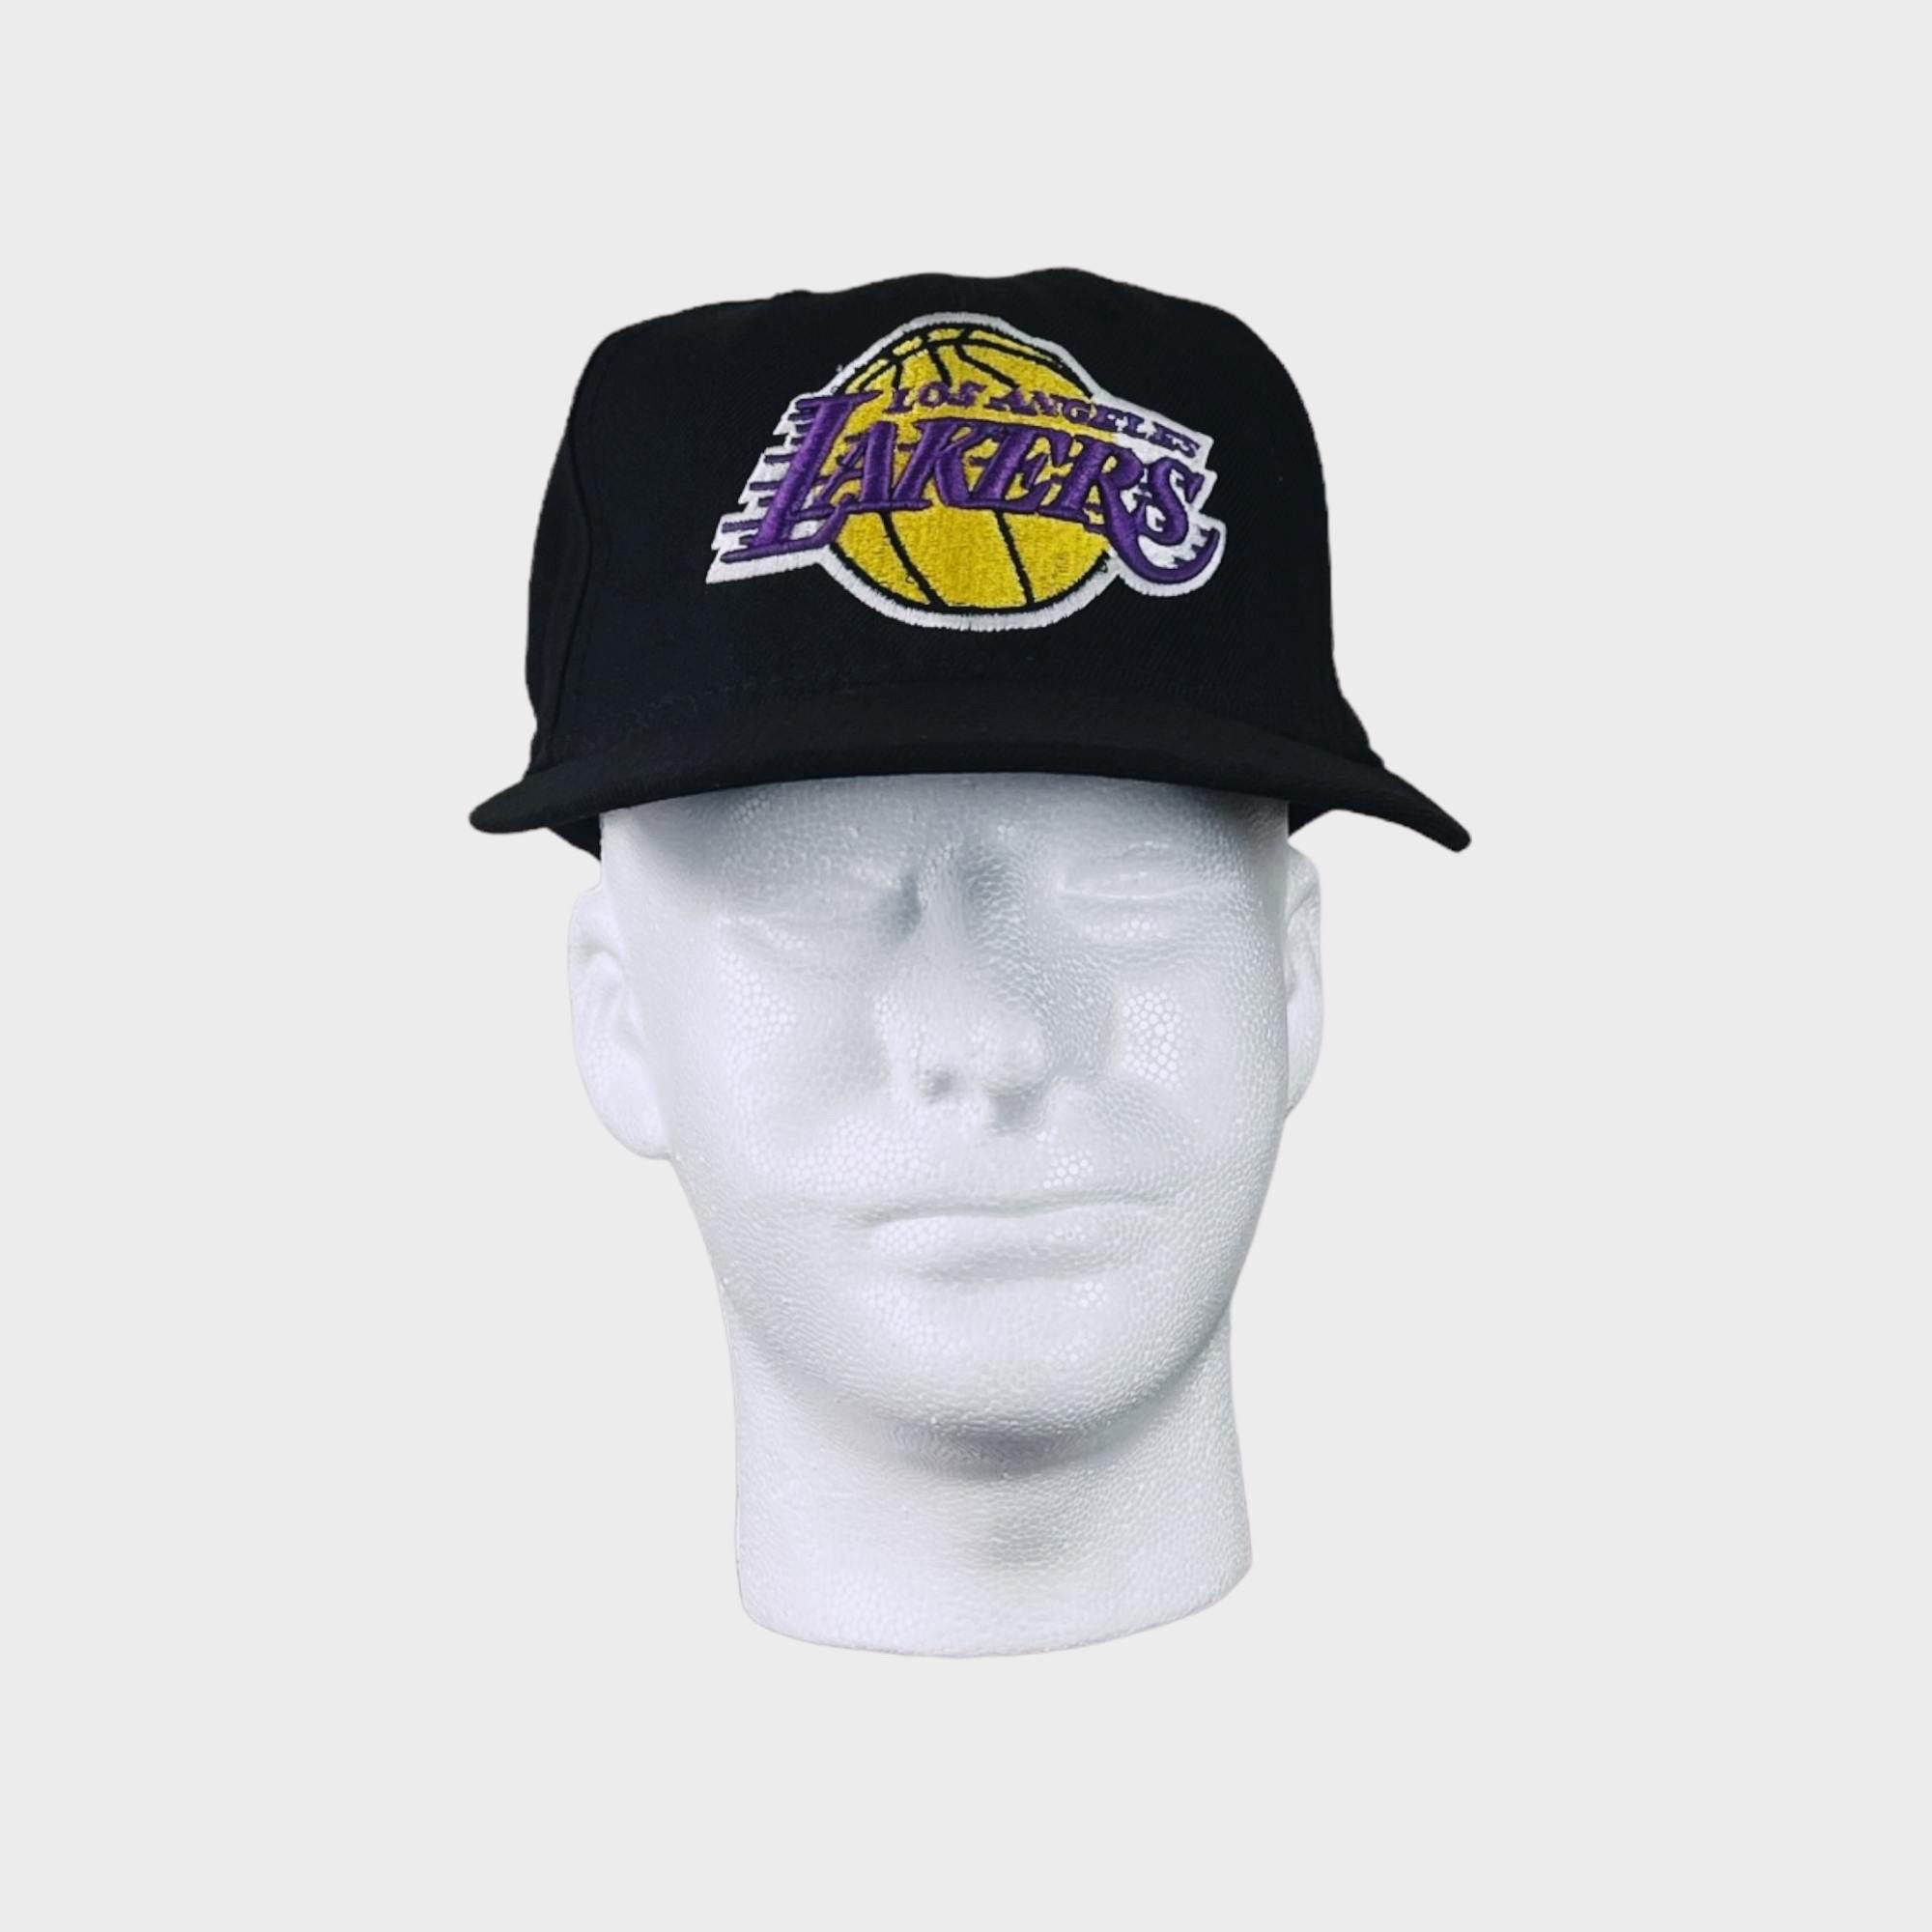 Vintage Los Angeles Lakers New Era Fitted Pro Basketball Hat, Size